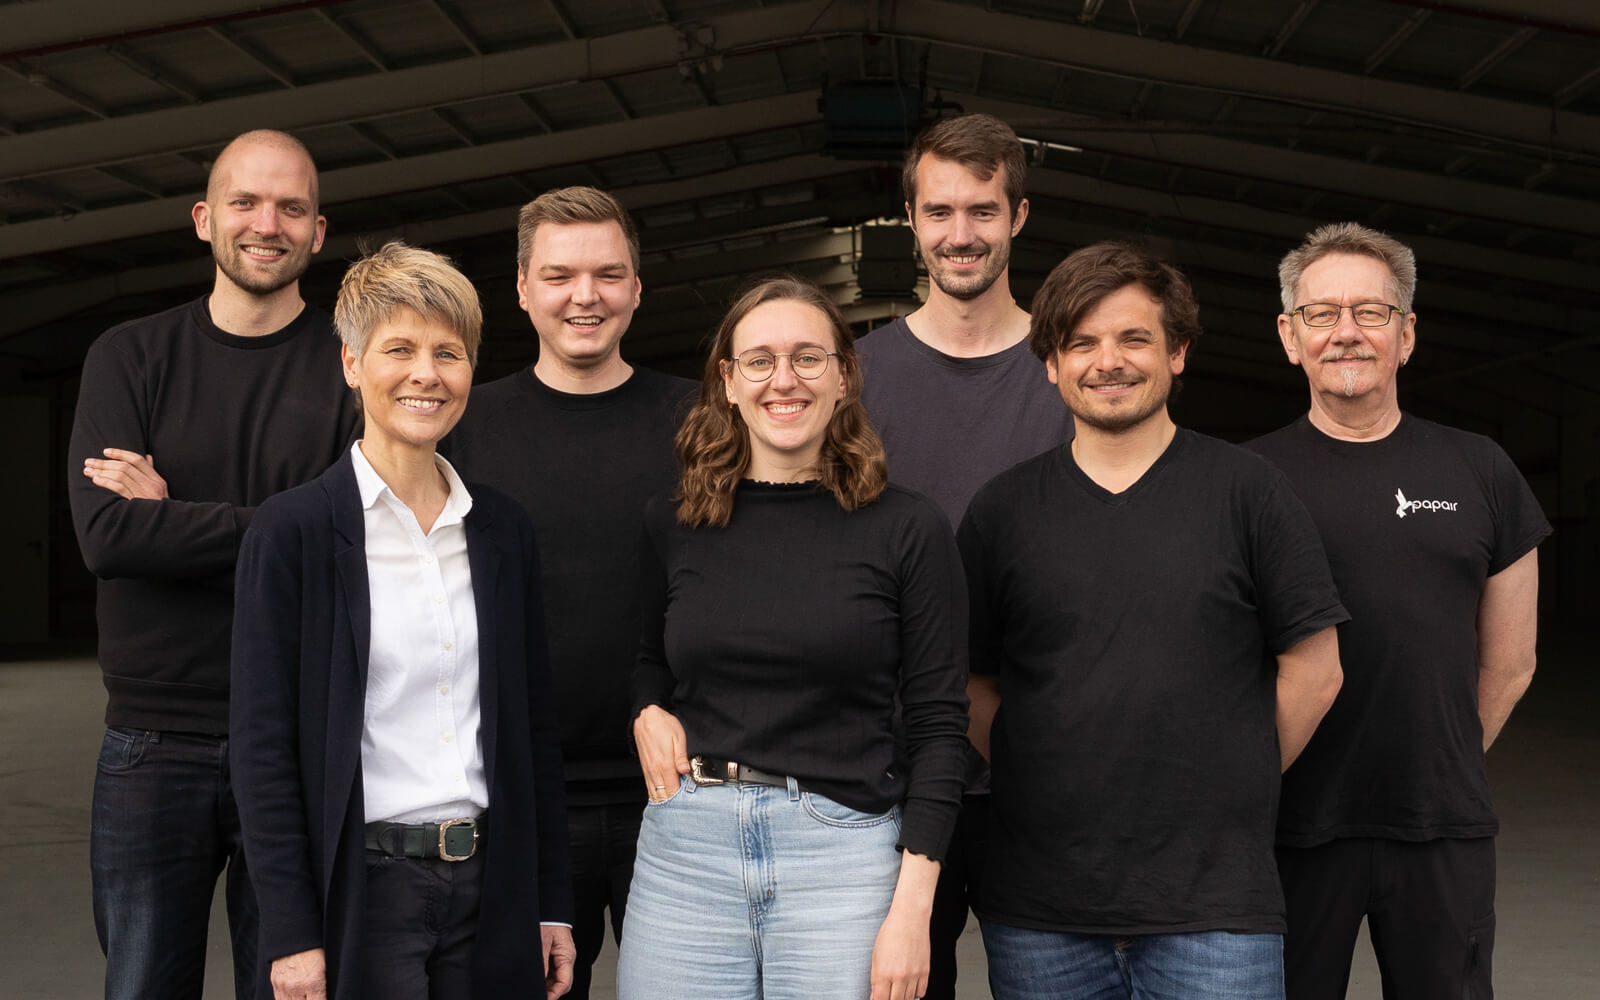 The team of seven people from the startup Papair from Hanover stands in front of the production hall in Rethem and smiles into the camera